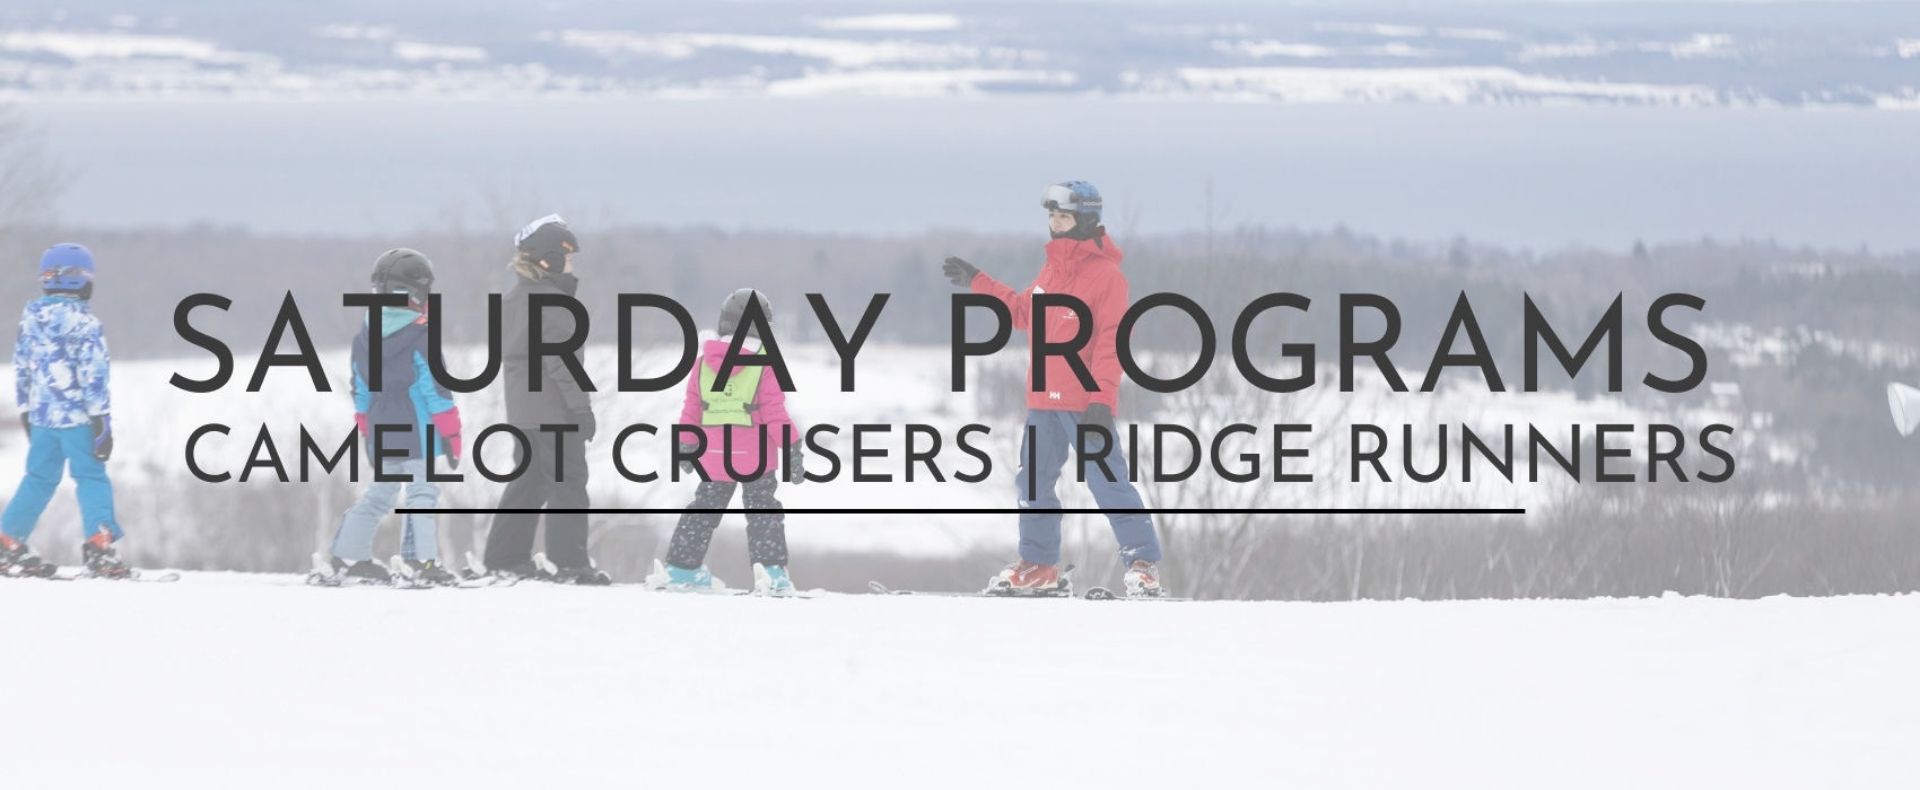 Camelot Cruisers or Ridge Runners at The Highlands	